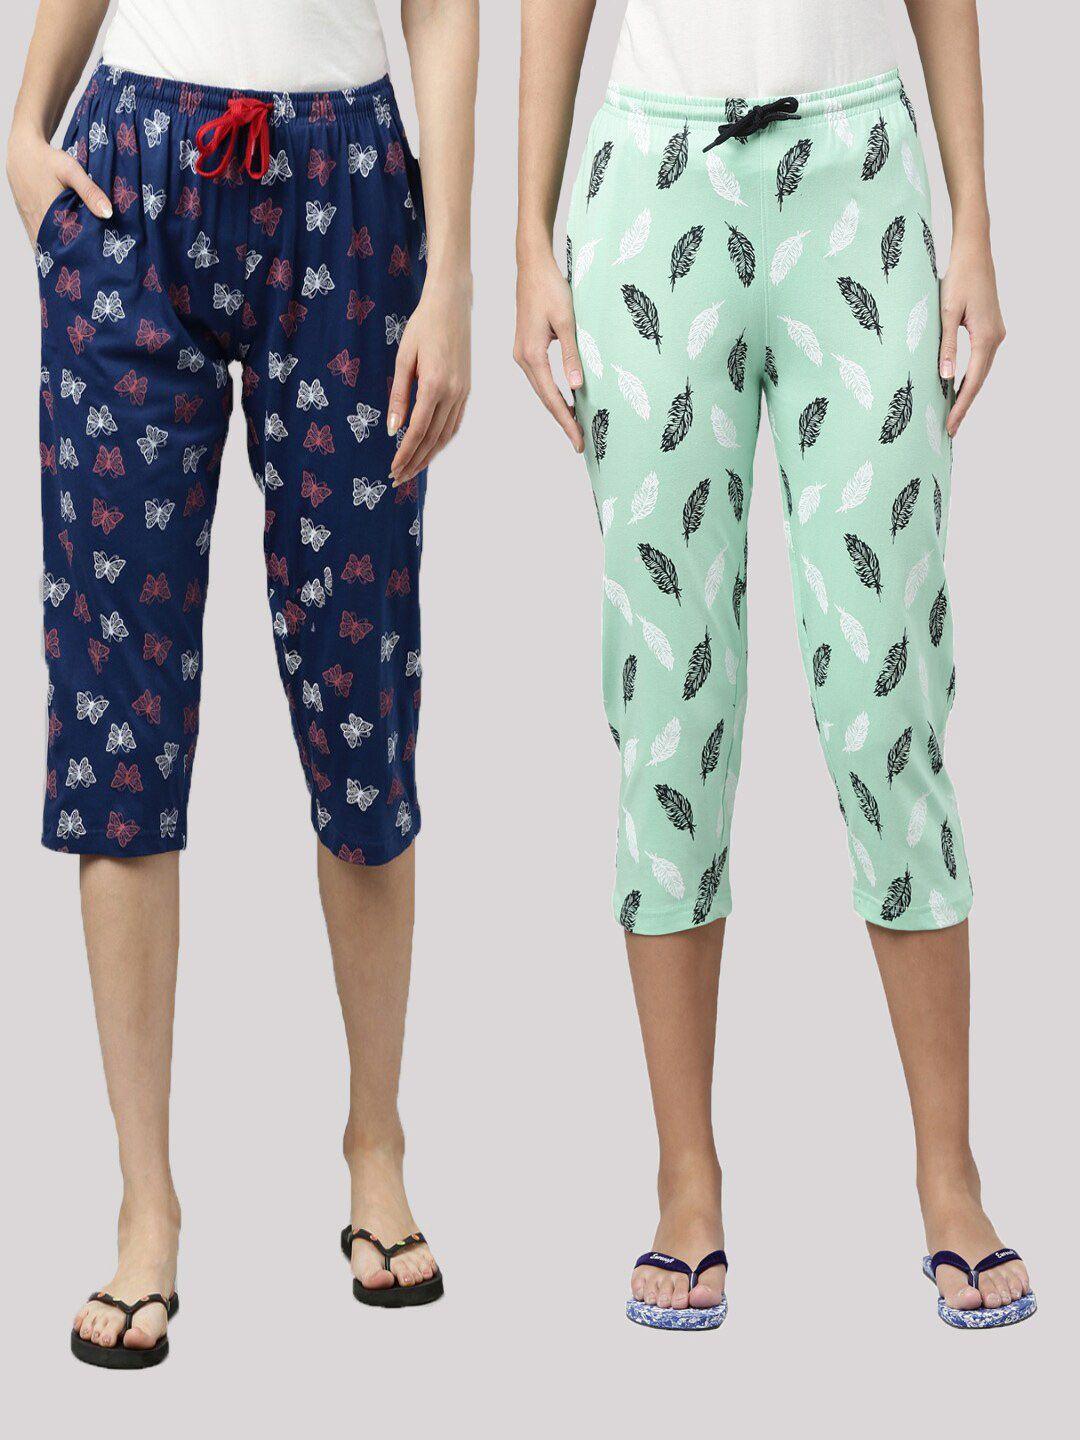 kryptic women pack of 2 navy blue & green printed pure cotton capris